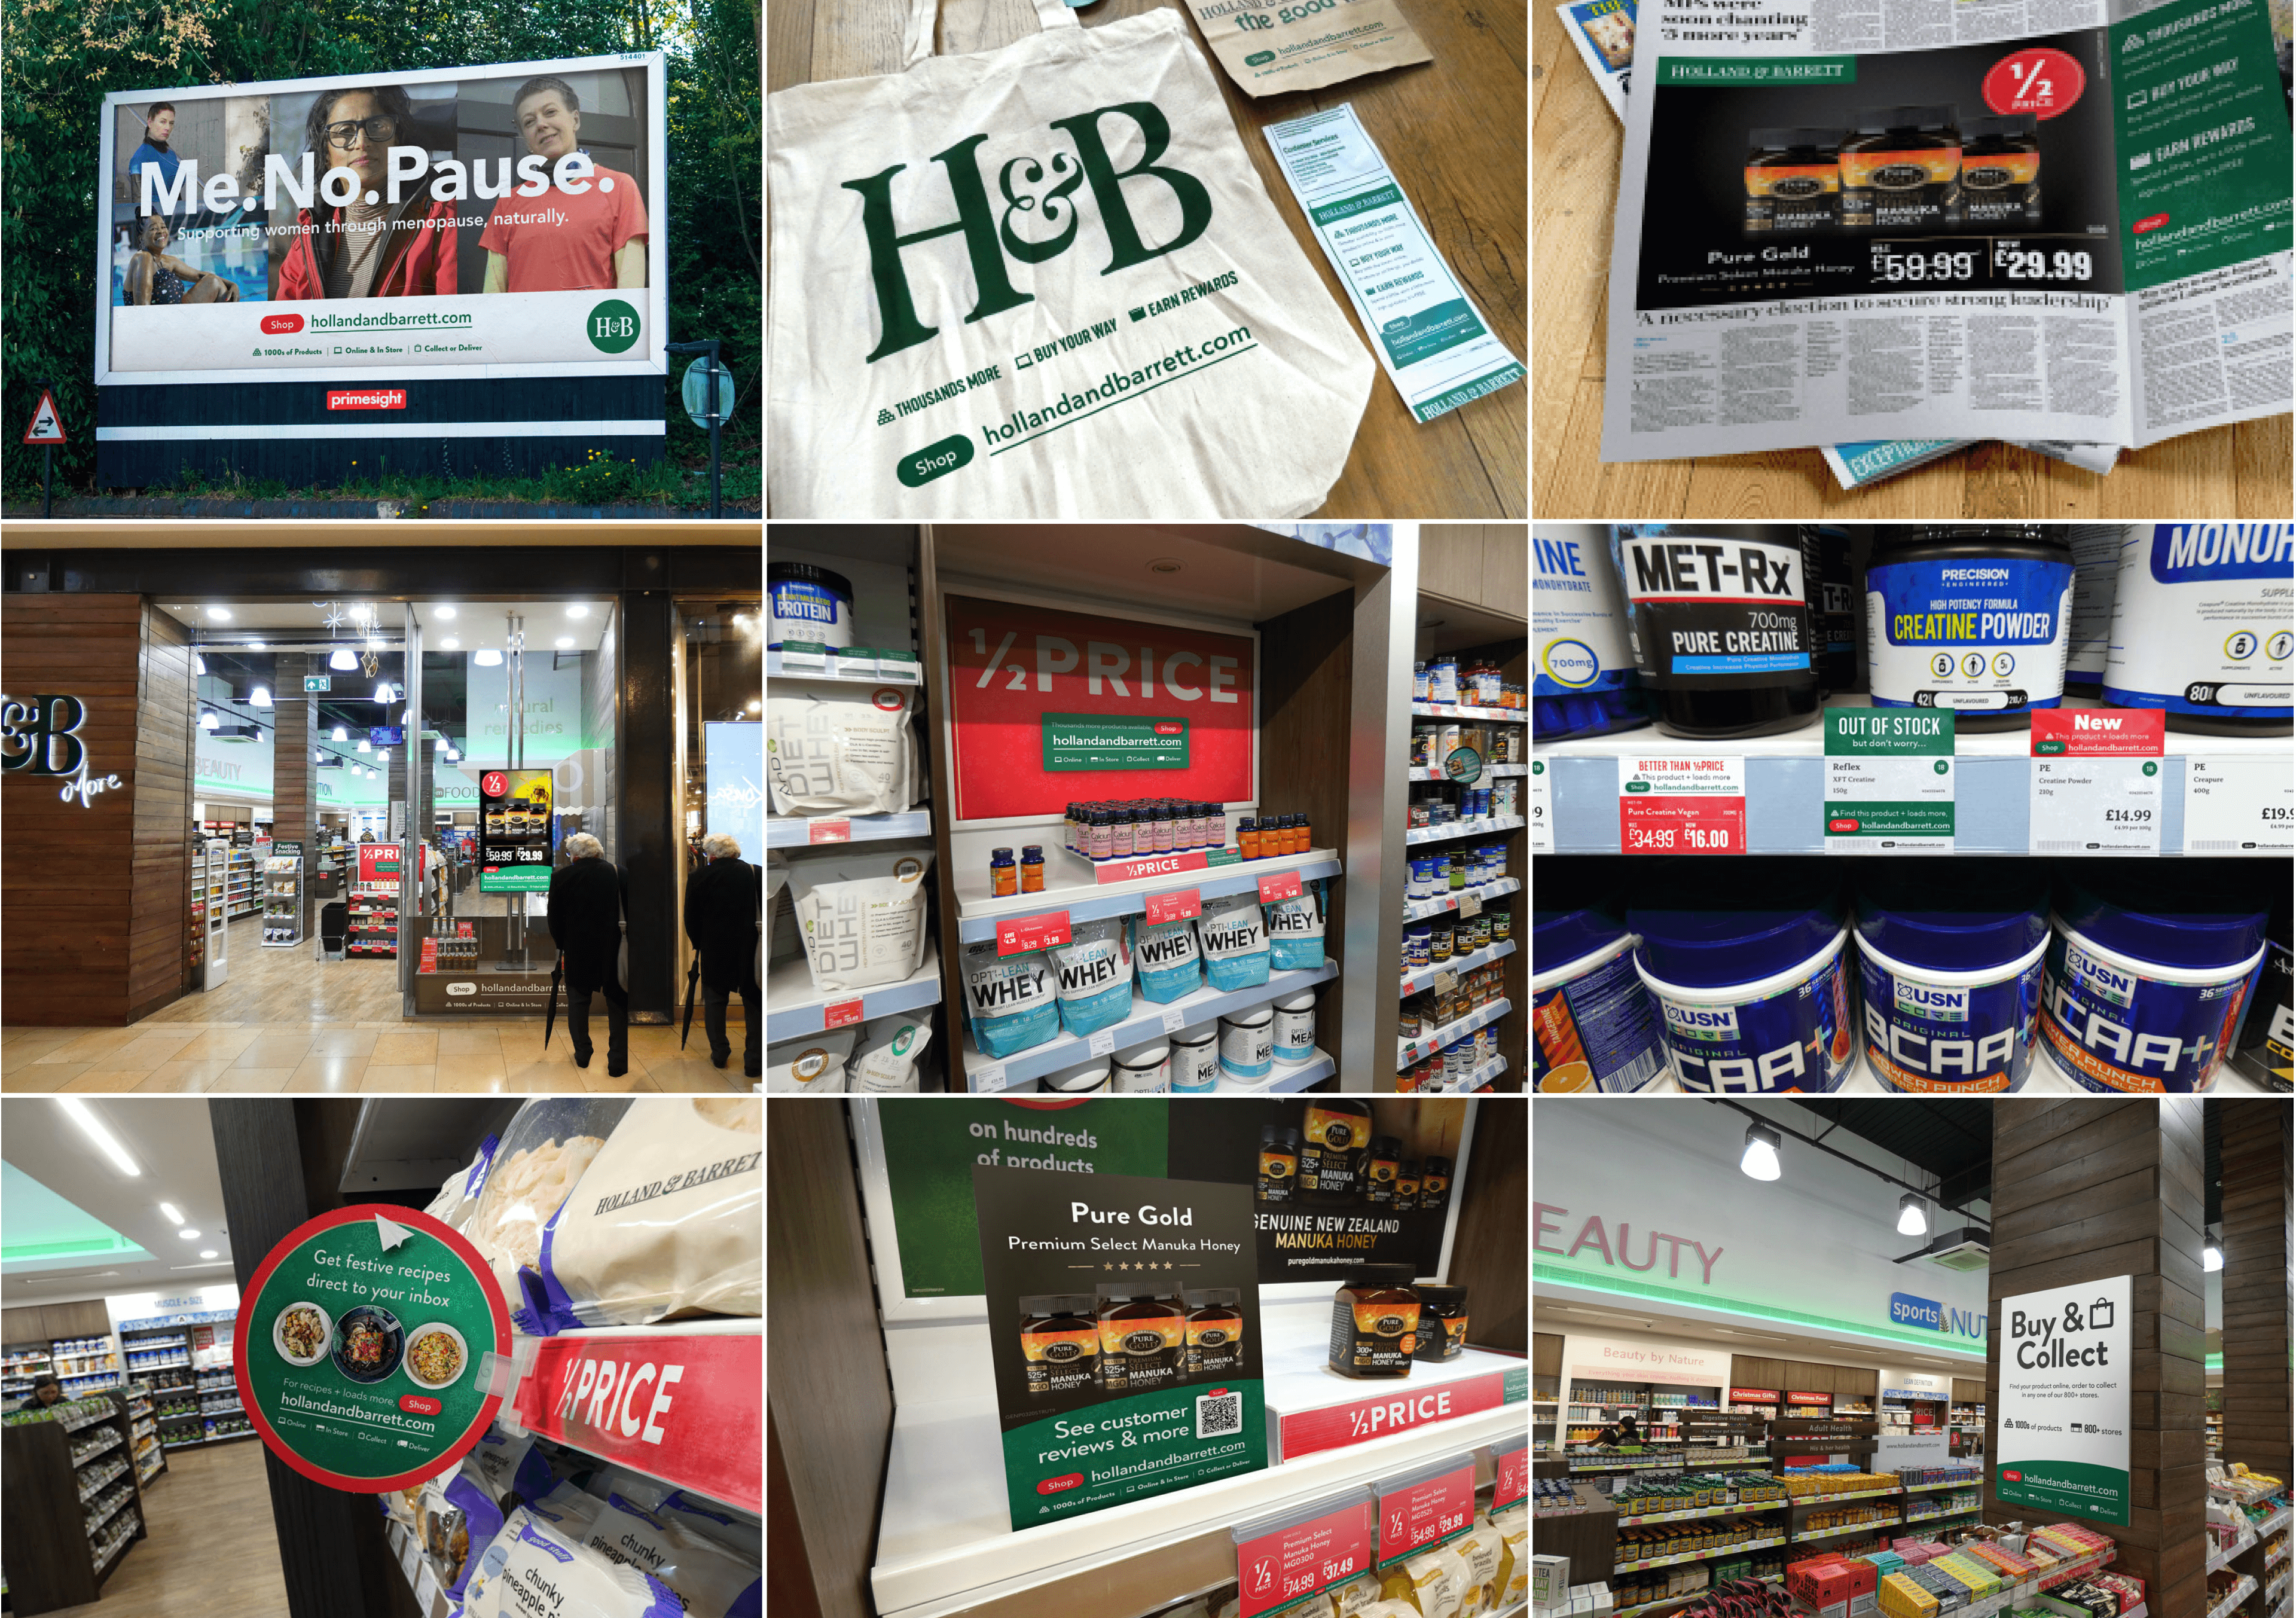 A series of nine images showing the Holland and Barrett branding in the store